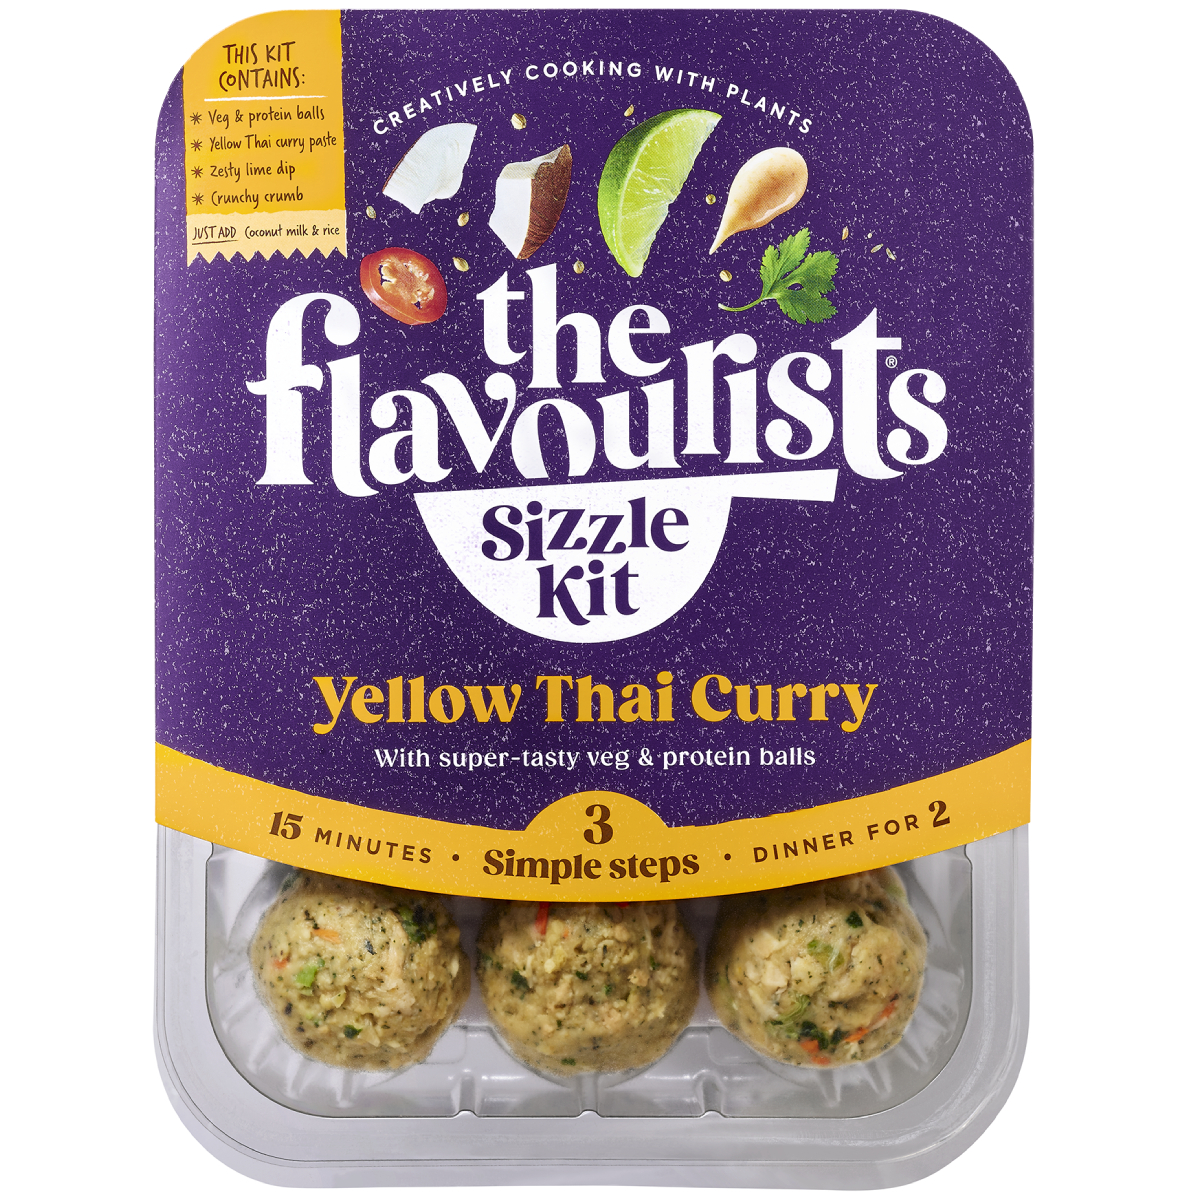 The Flavourists Yellow Thai Curry